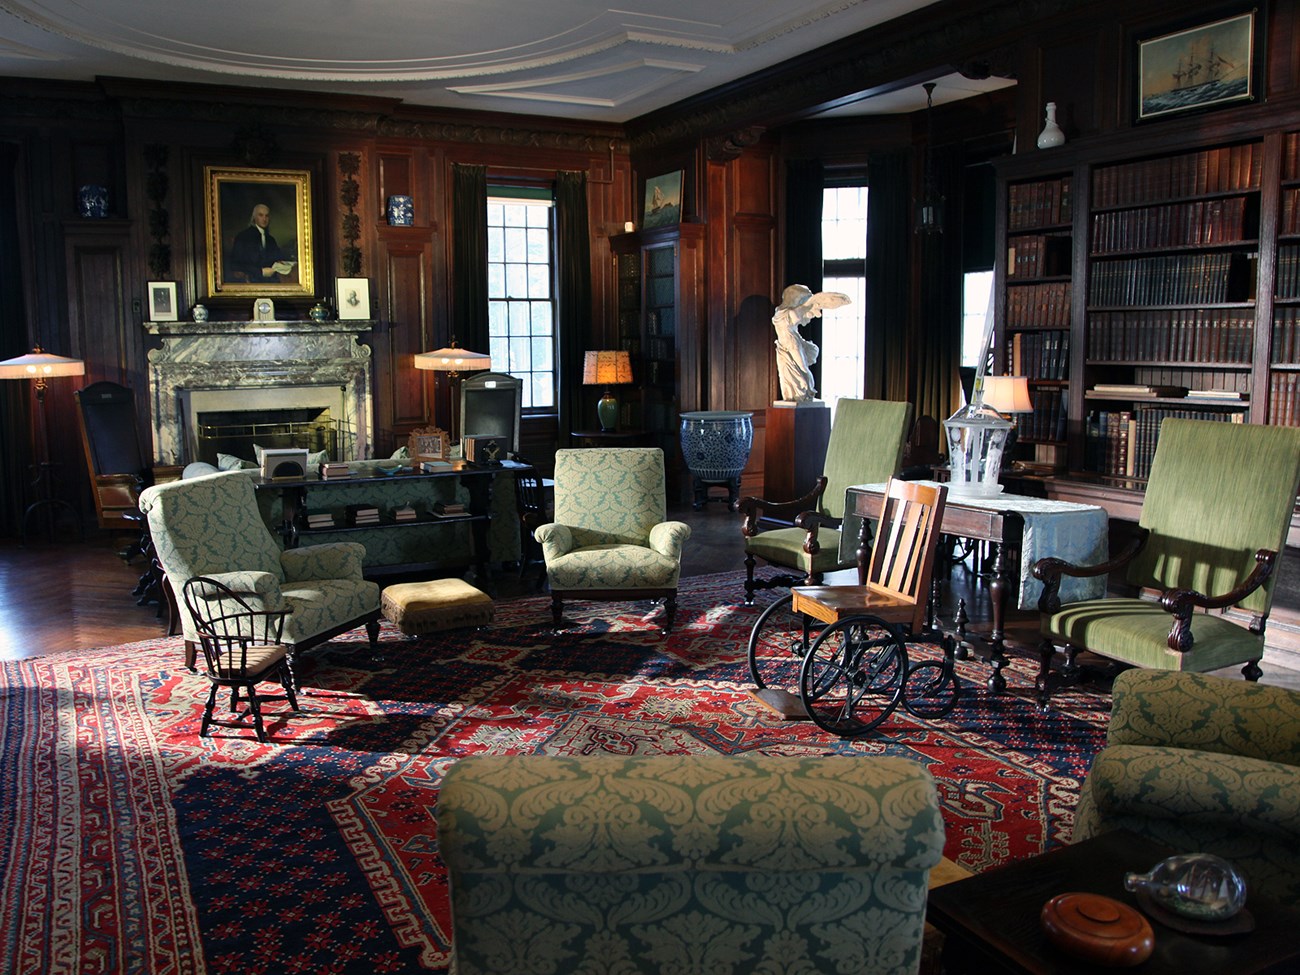 A large room lined with bookshelves and crowded with furniture.